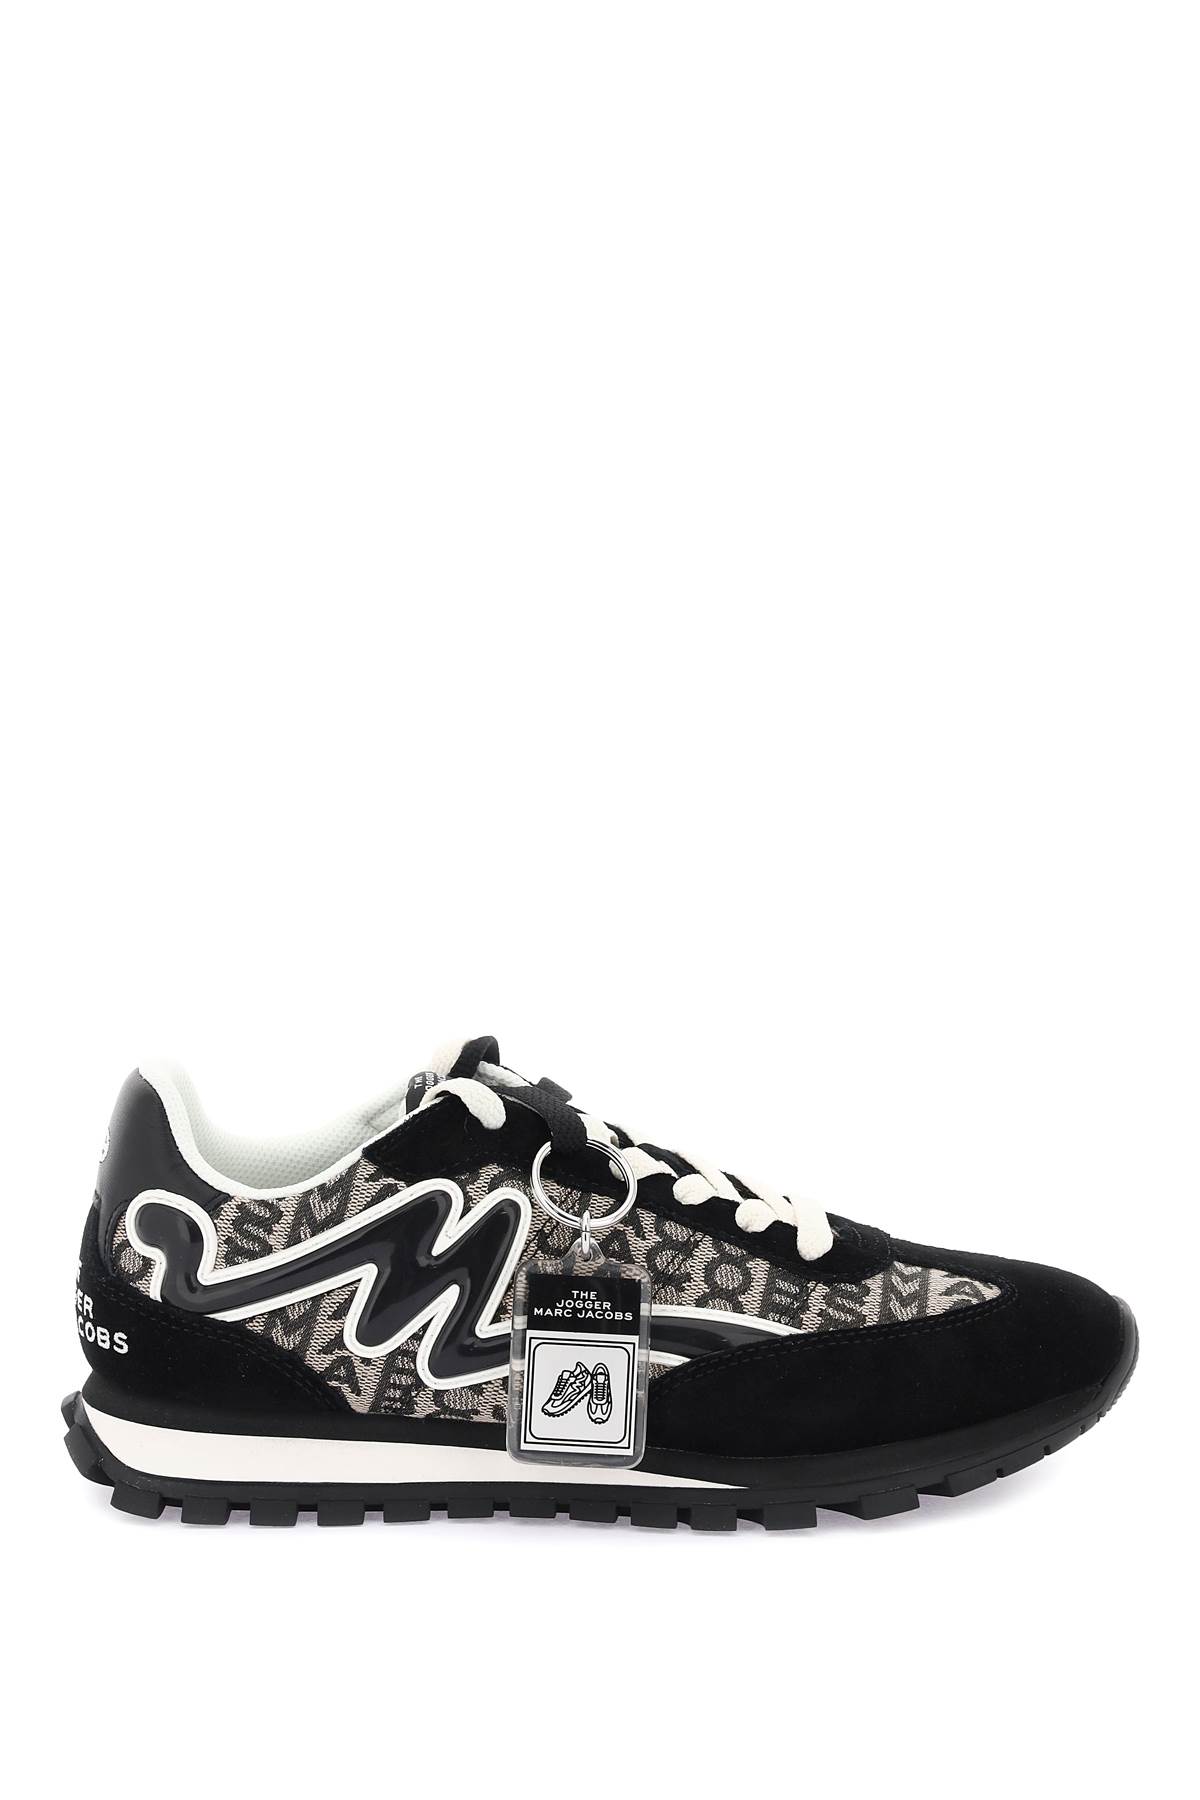 MARC JACOBS THE JOGGER SNEAKERS